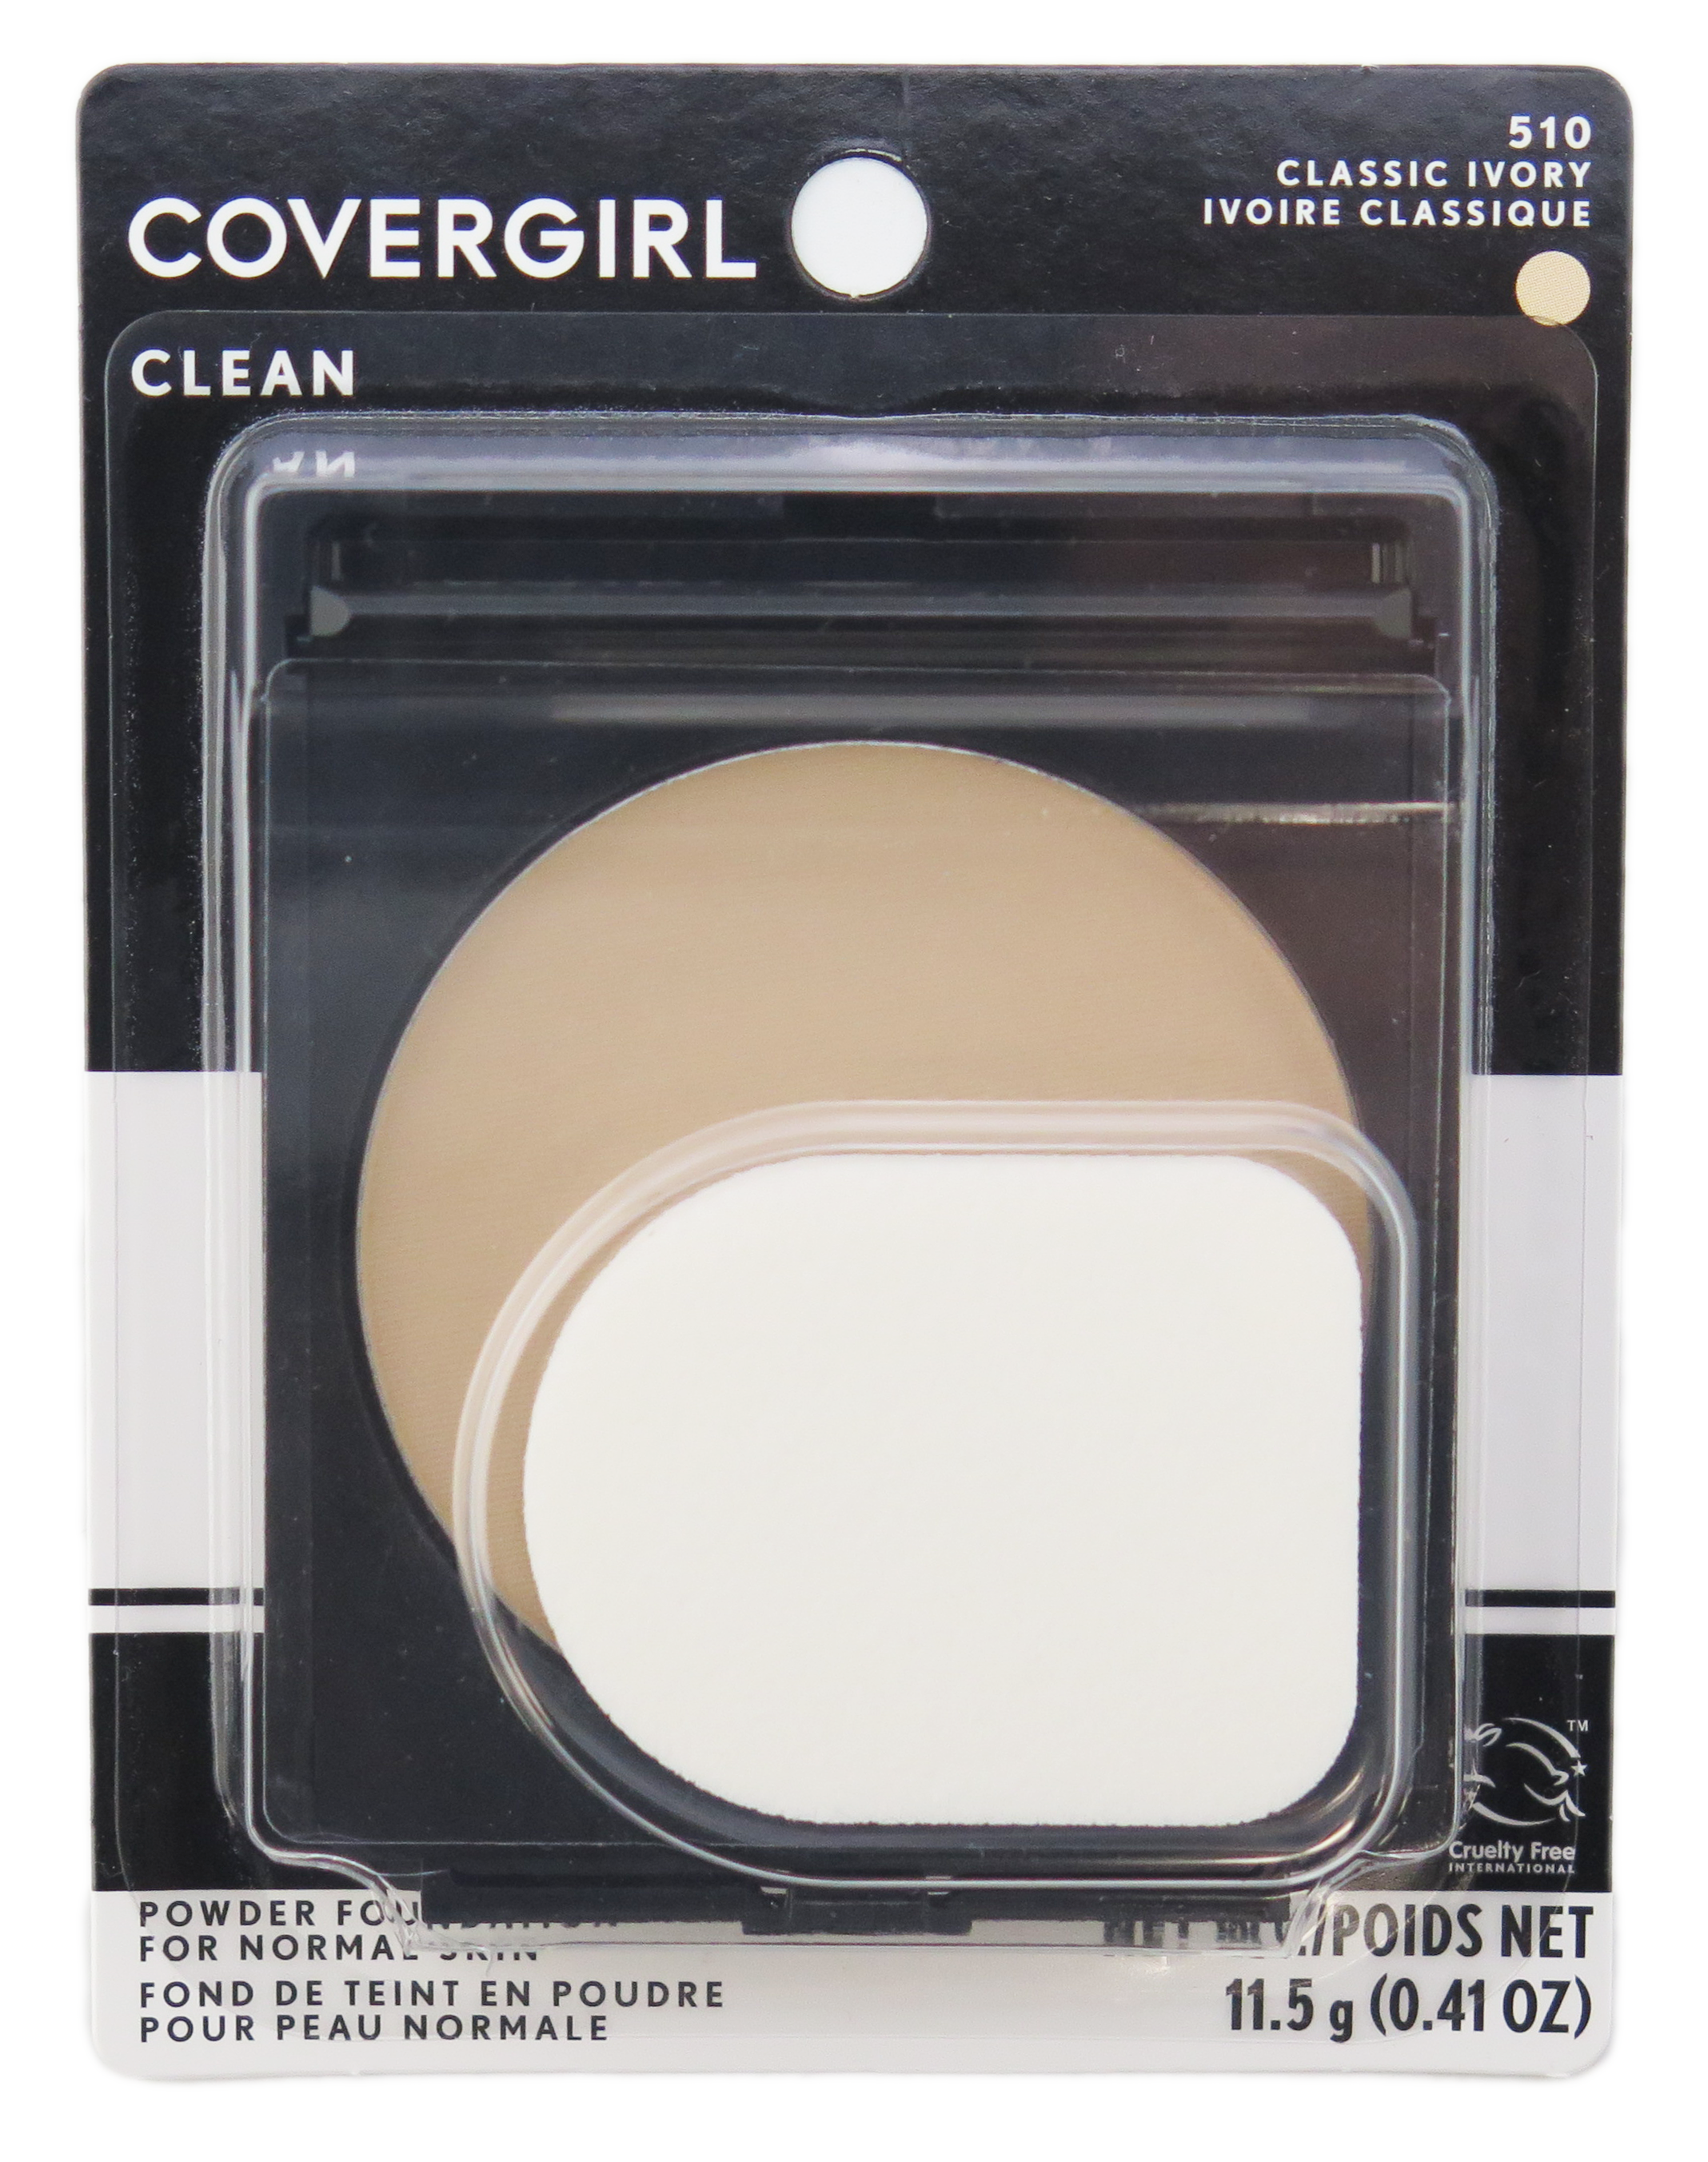 CoverGirl Clean Powder Foundation Compact - Assorted